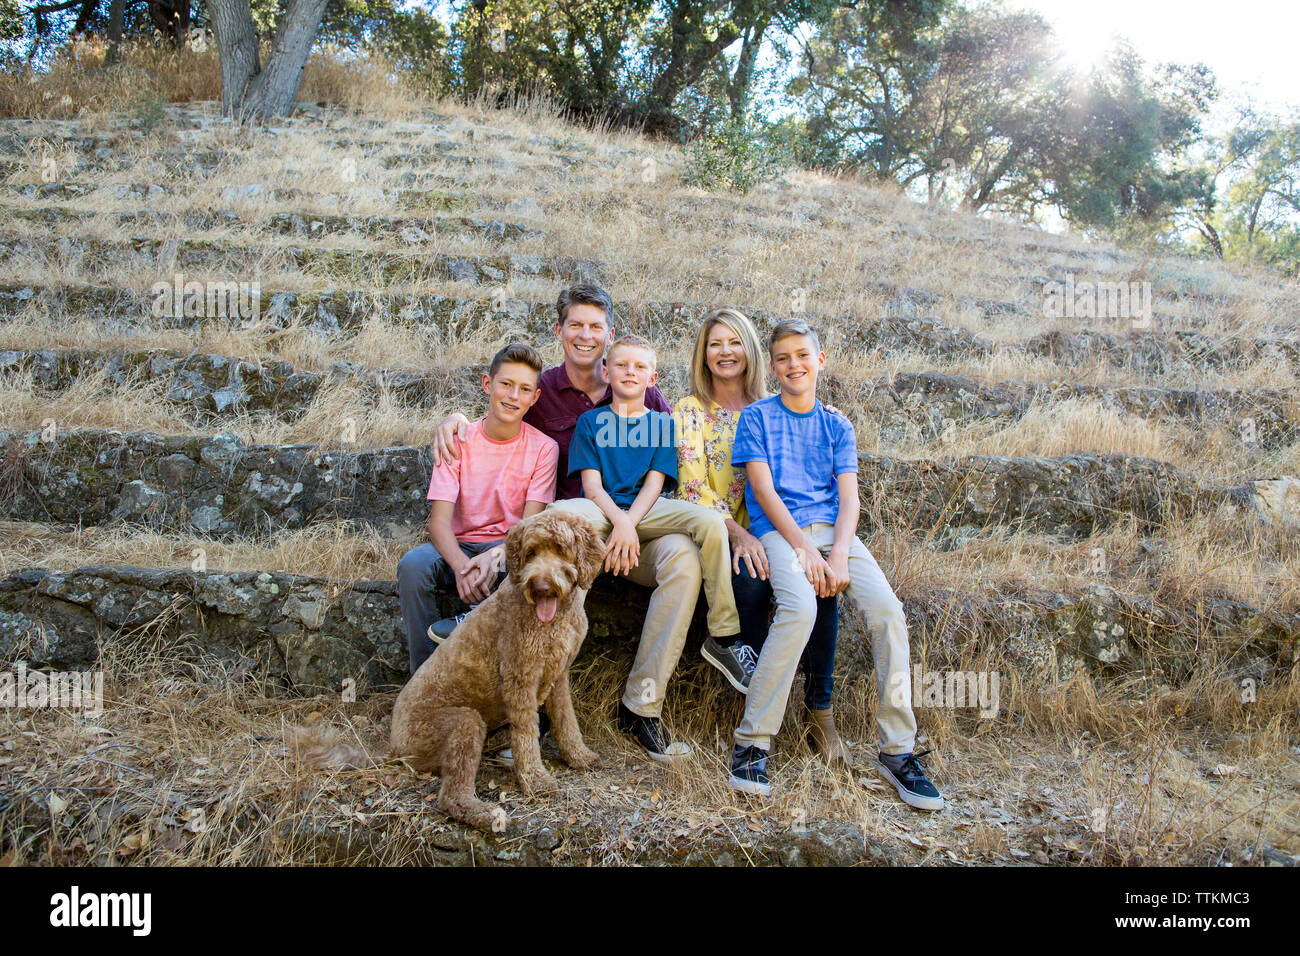 Family of 5 smile for a family portrait with dog in nature Stock Photo